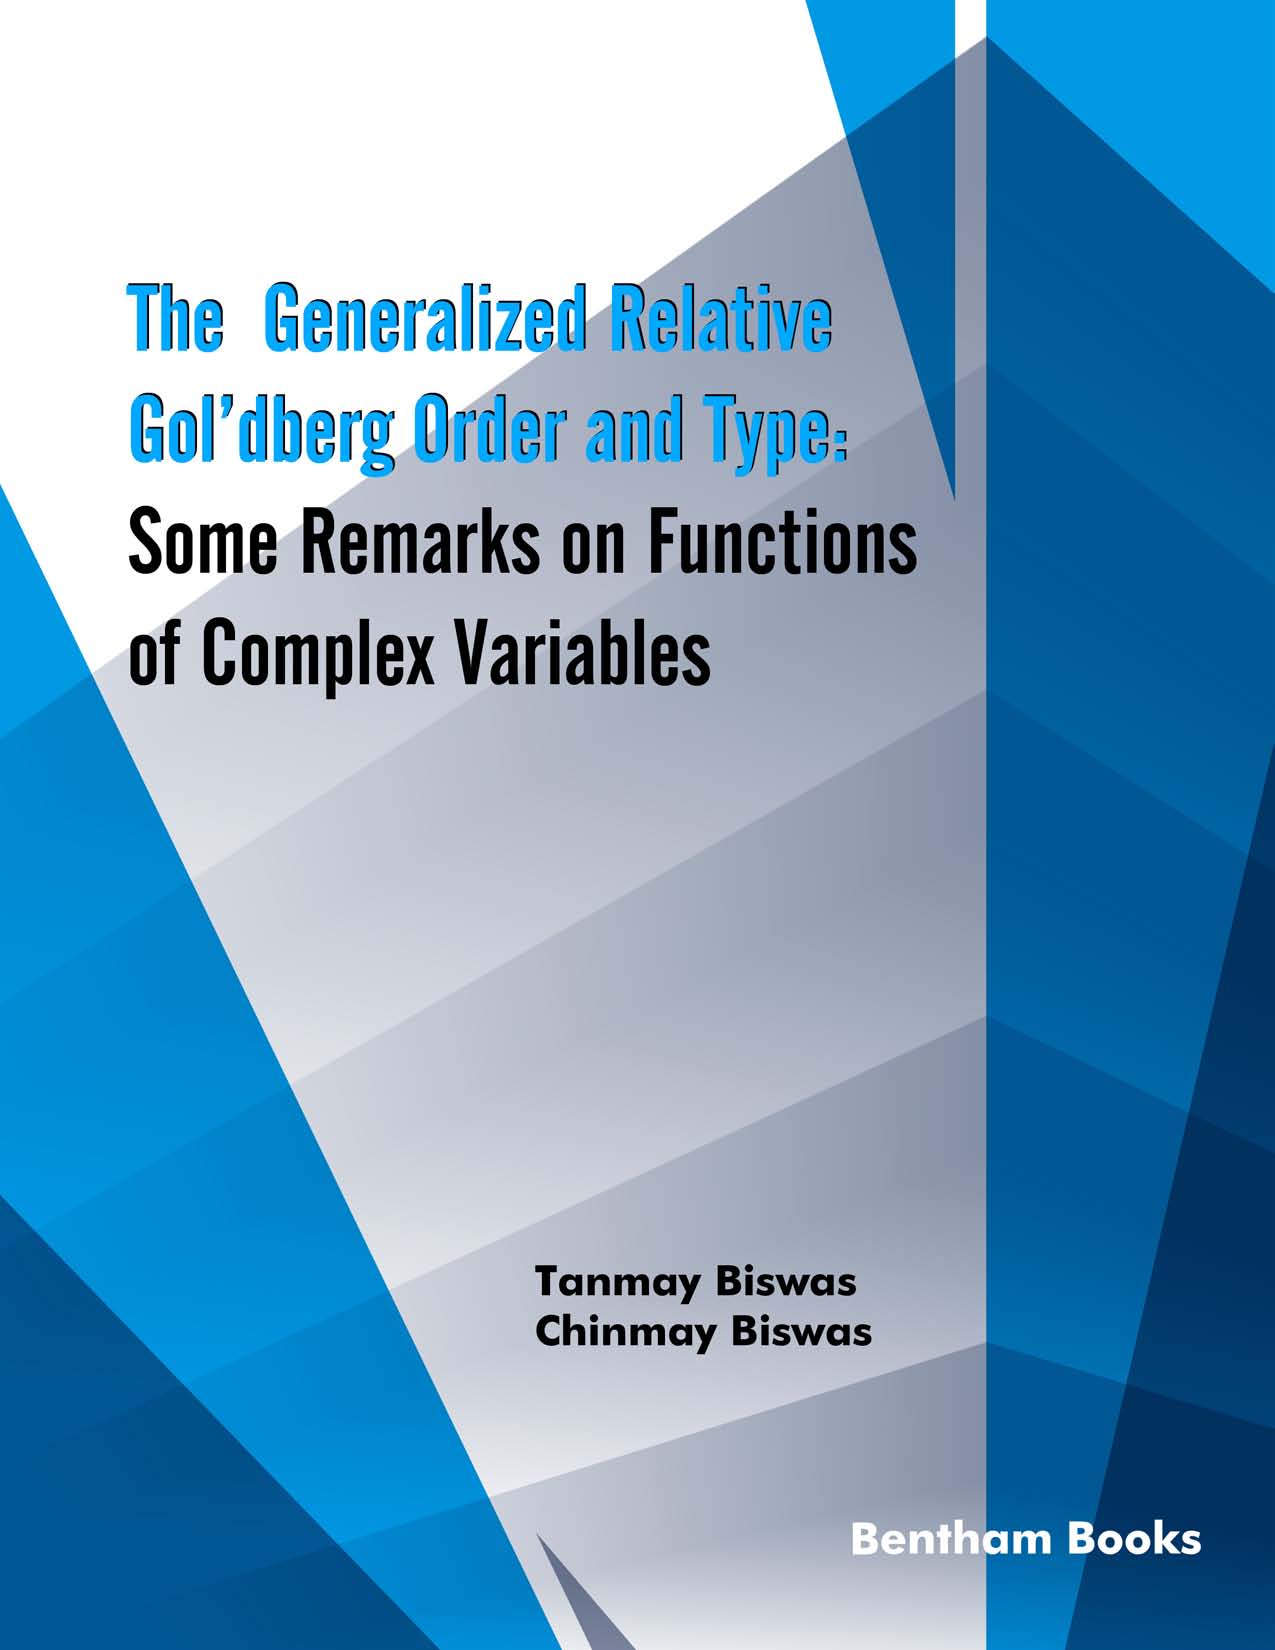 The Generalized Relative Gol’dberg Order and Type: Some Remarks on Functions of Complex Variables